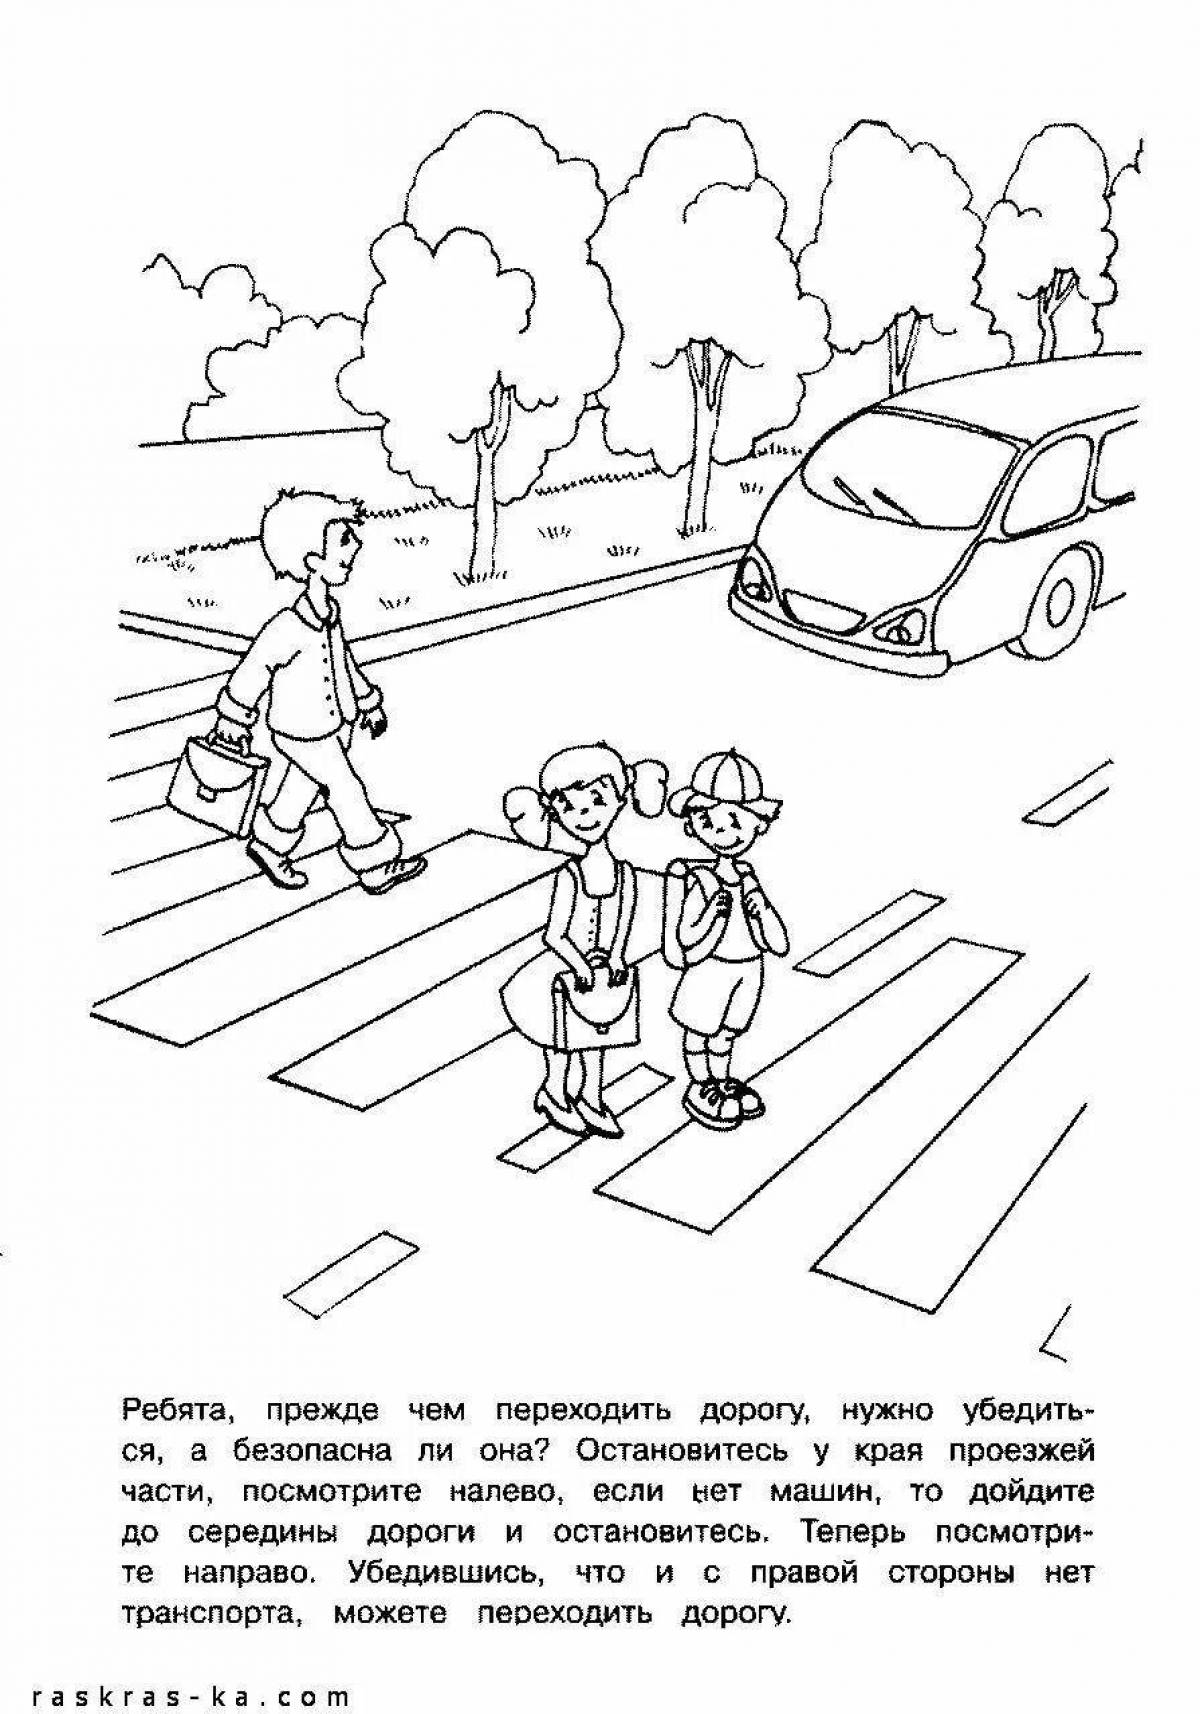 Entertaining coloring book traffic rules for schoolchildren